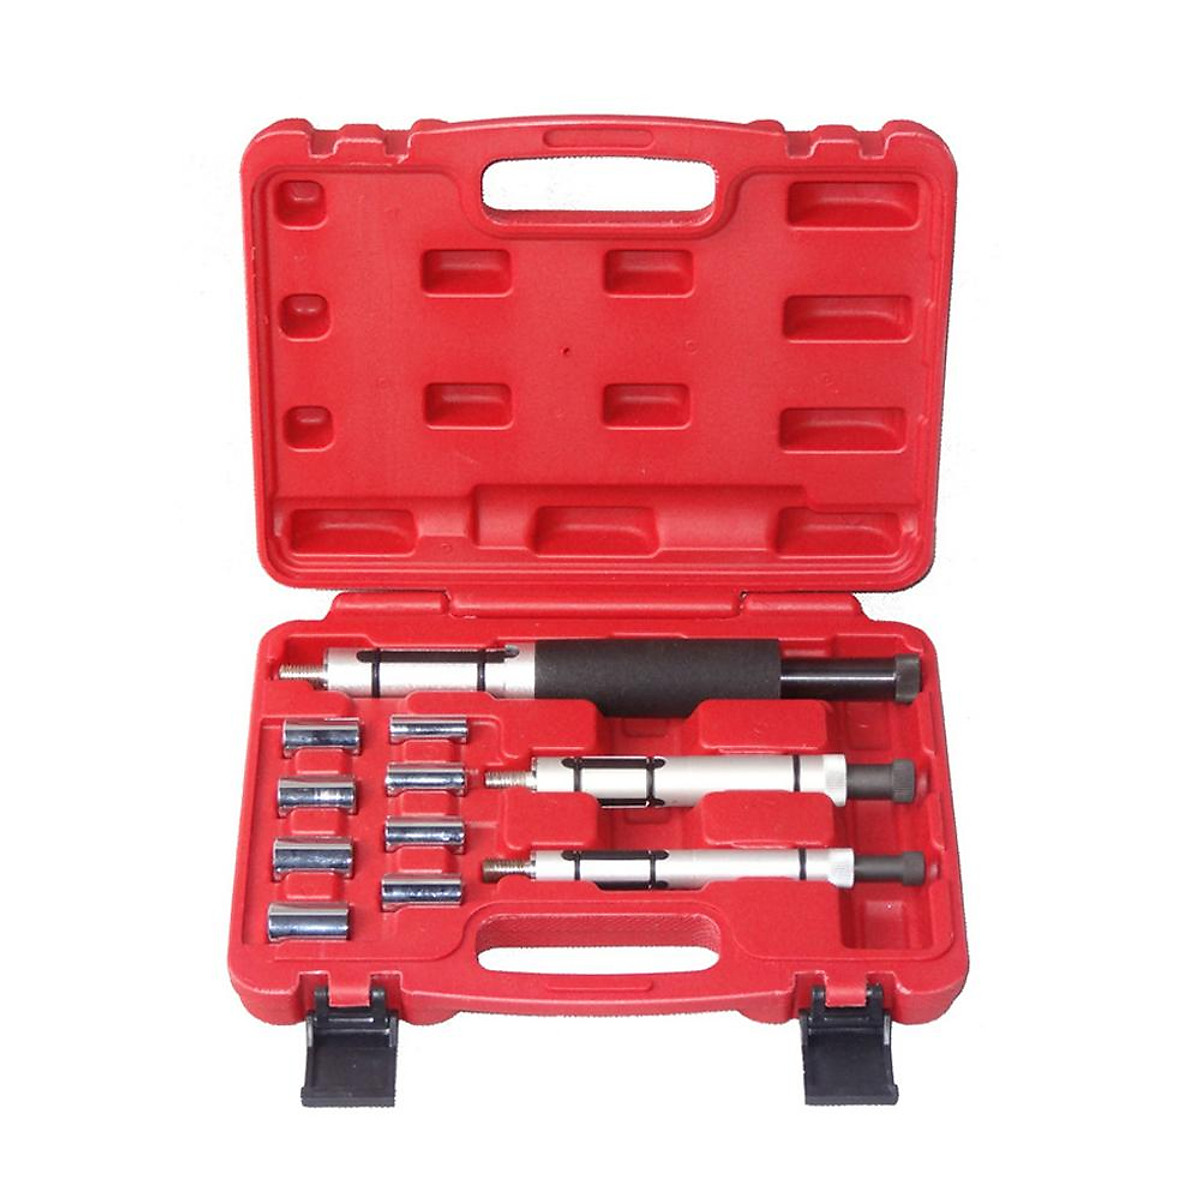 8 PCS Car Air Compressor Clutch Remover Installer Dualuse Wrench